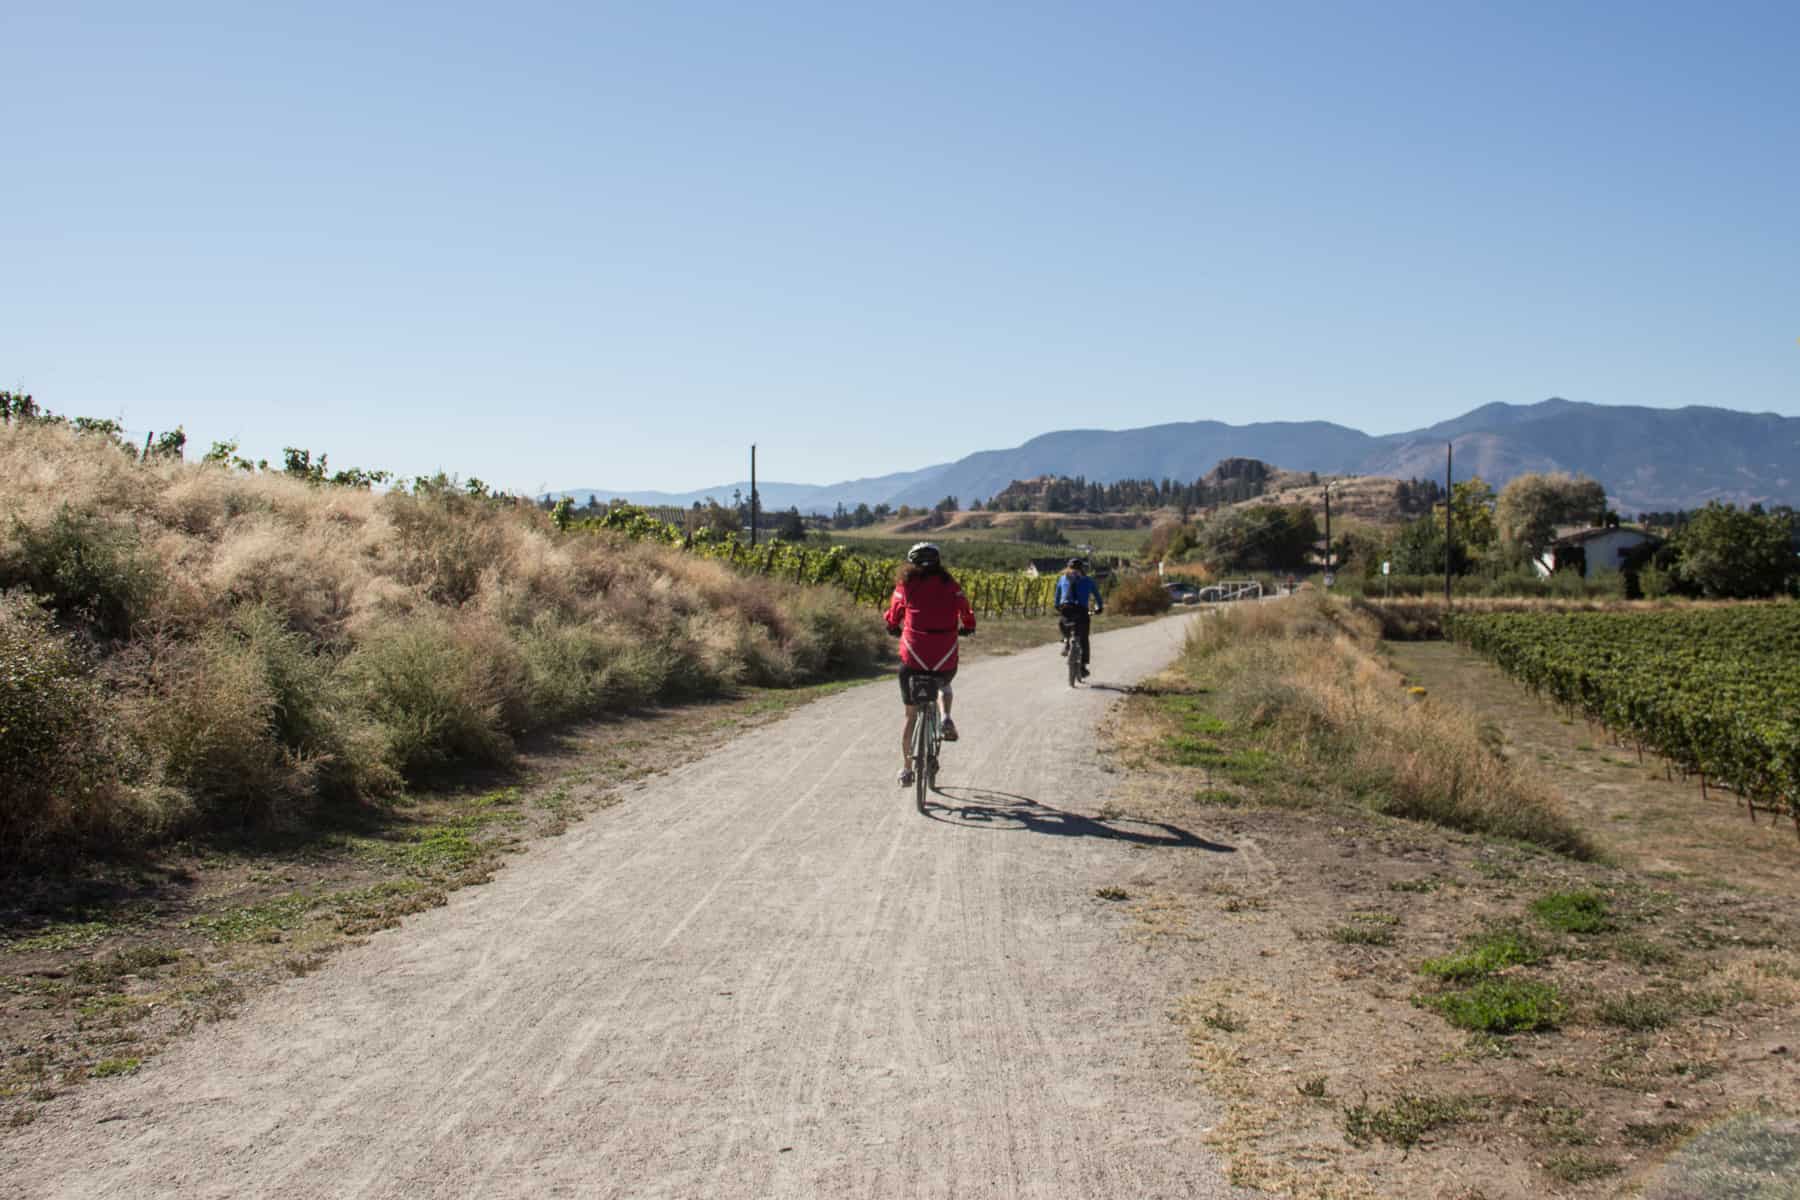 Cyclists on a road passing vineyards and rolling hills on the KVR Trail in Penticton, BC. 